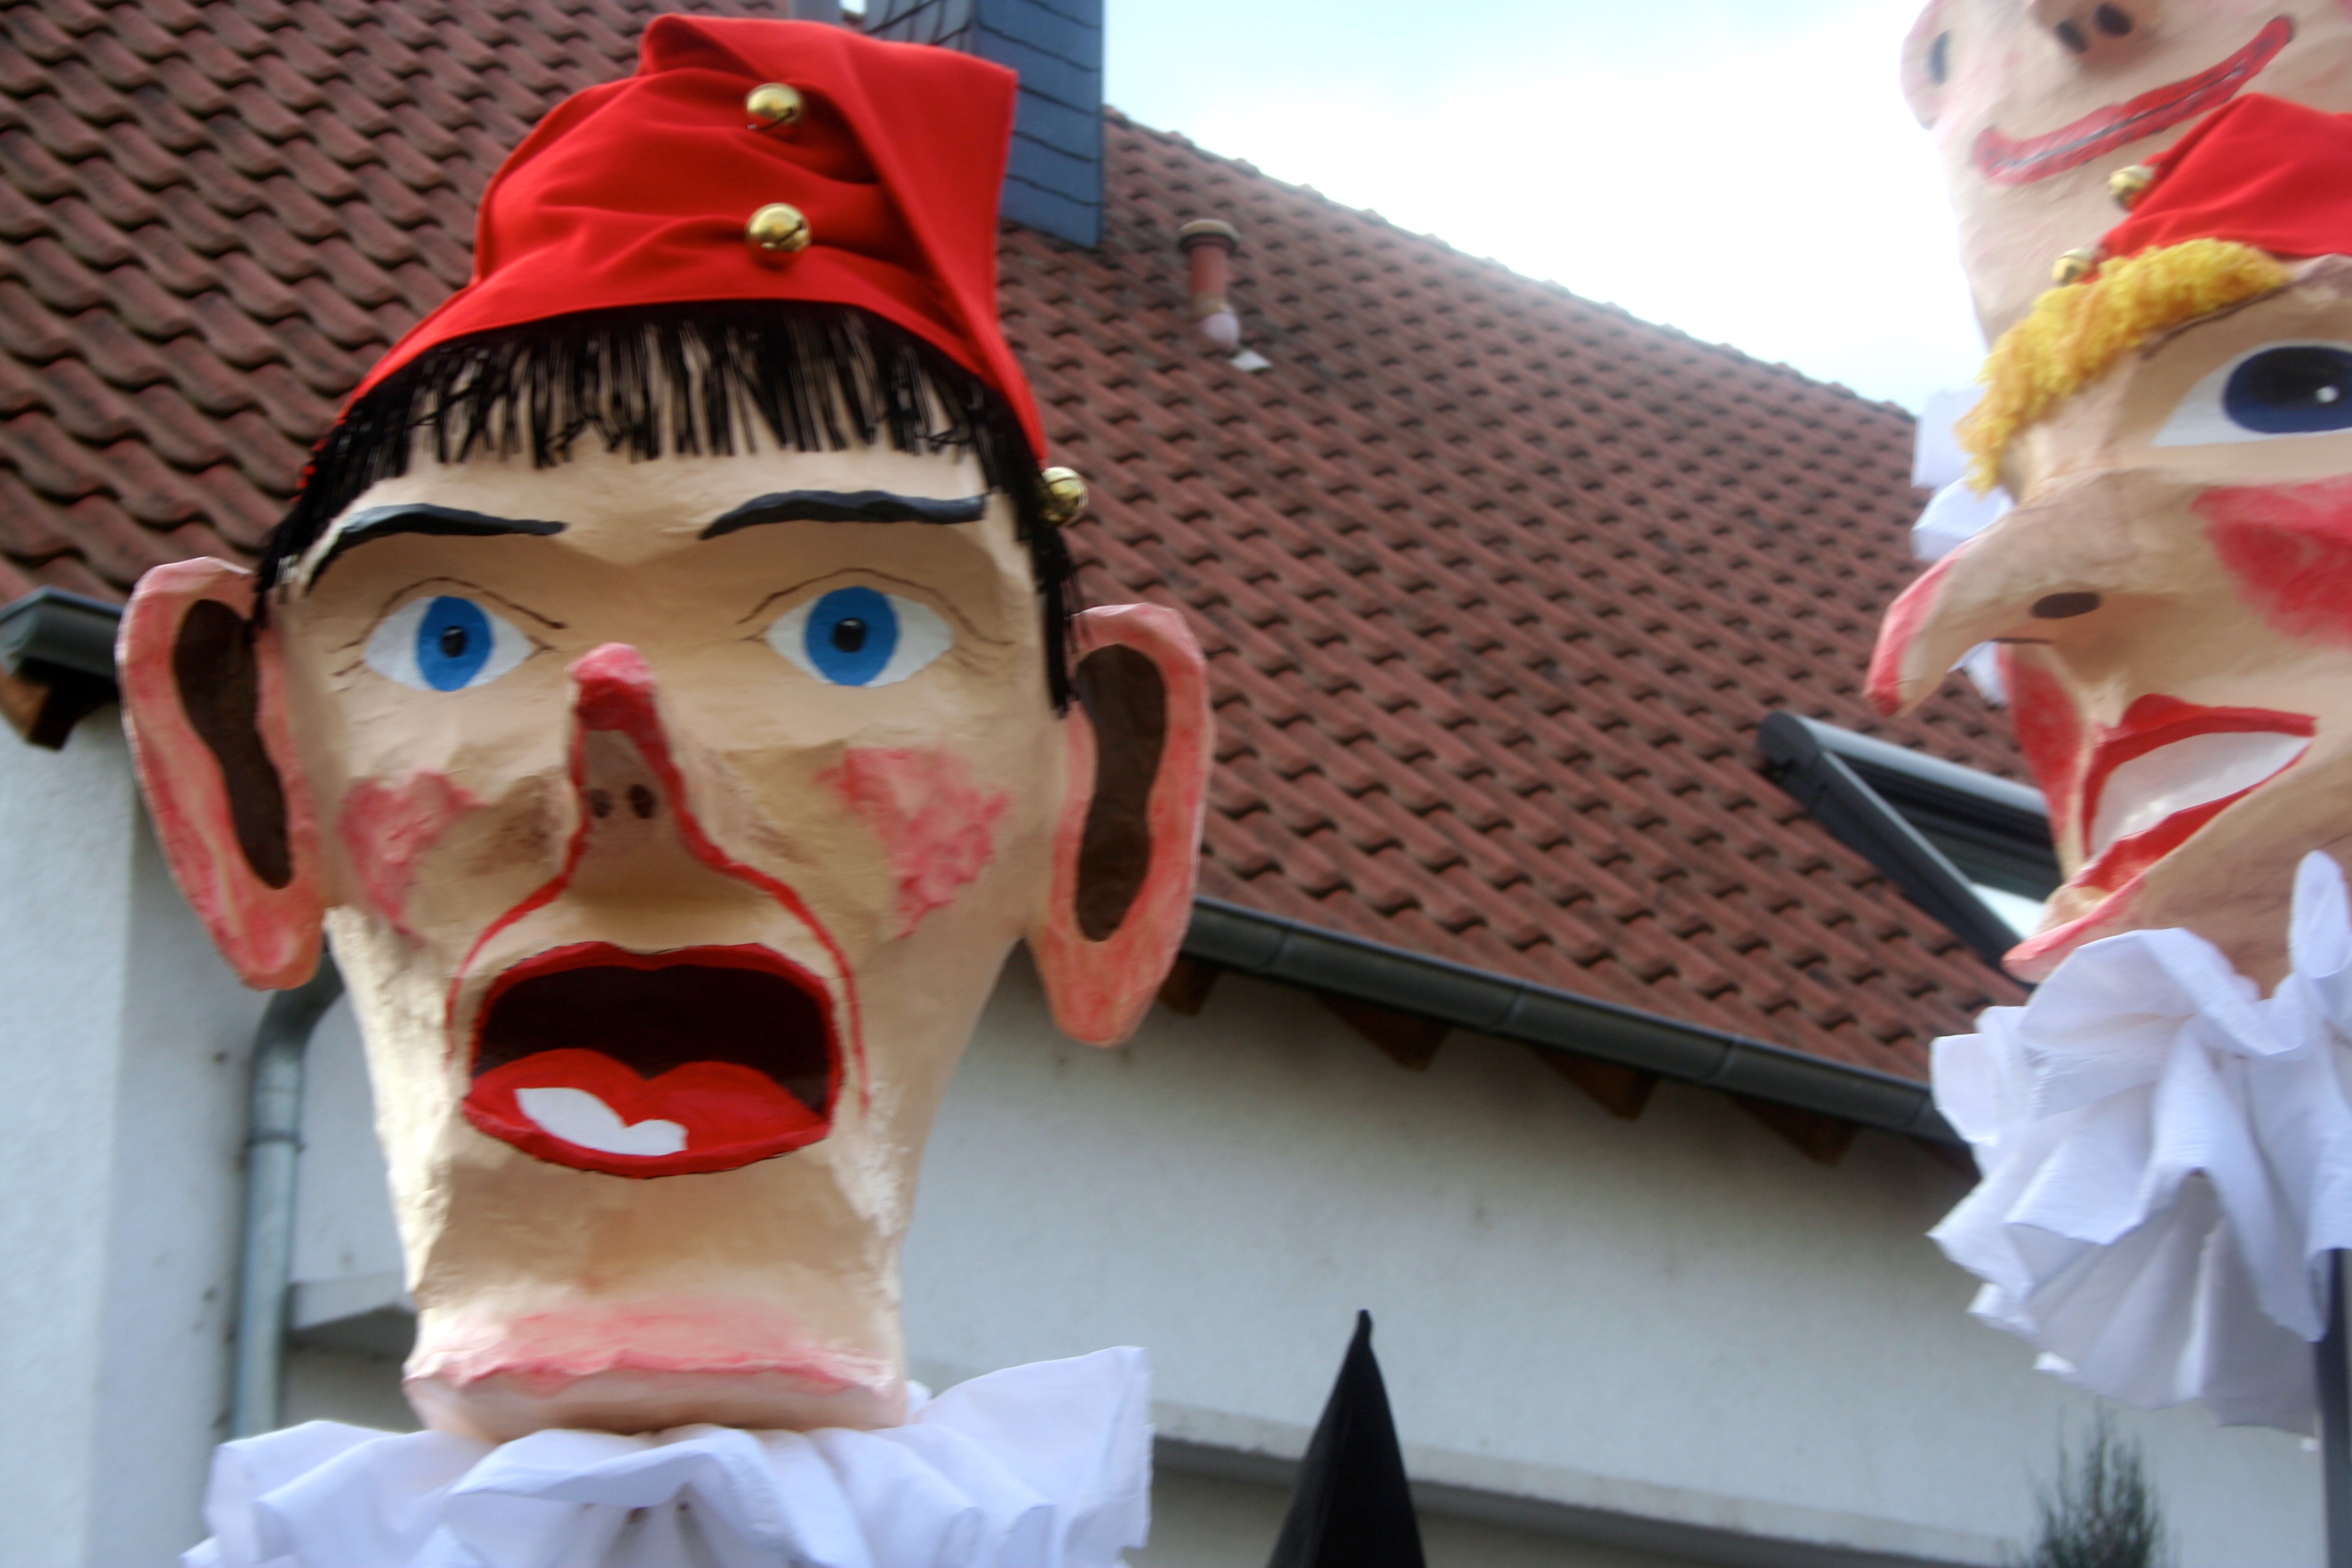 Fasching and Karneval: What the Heck are They?